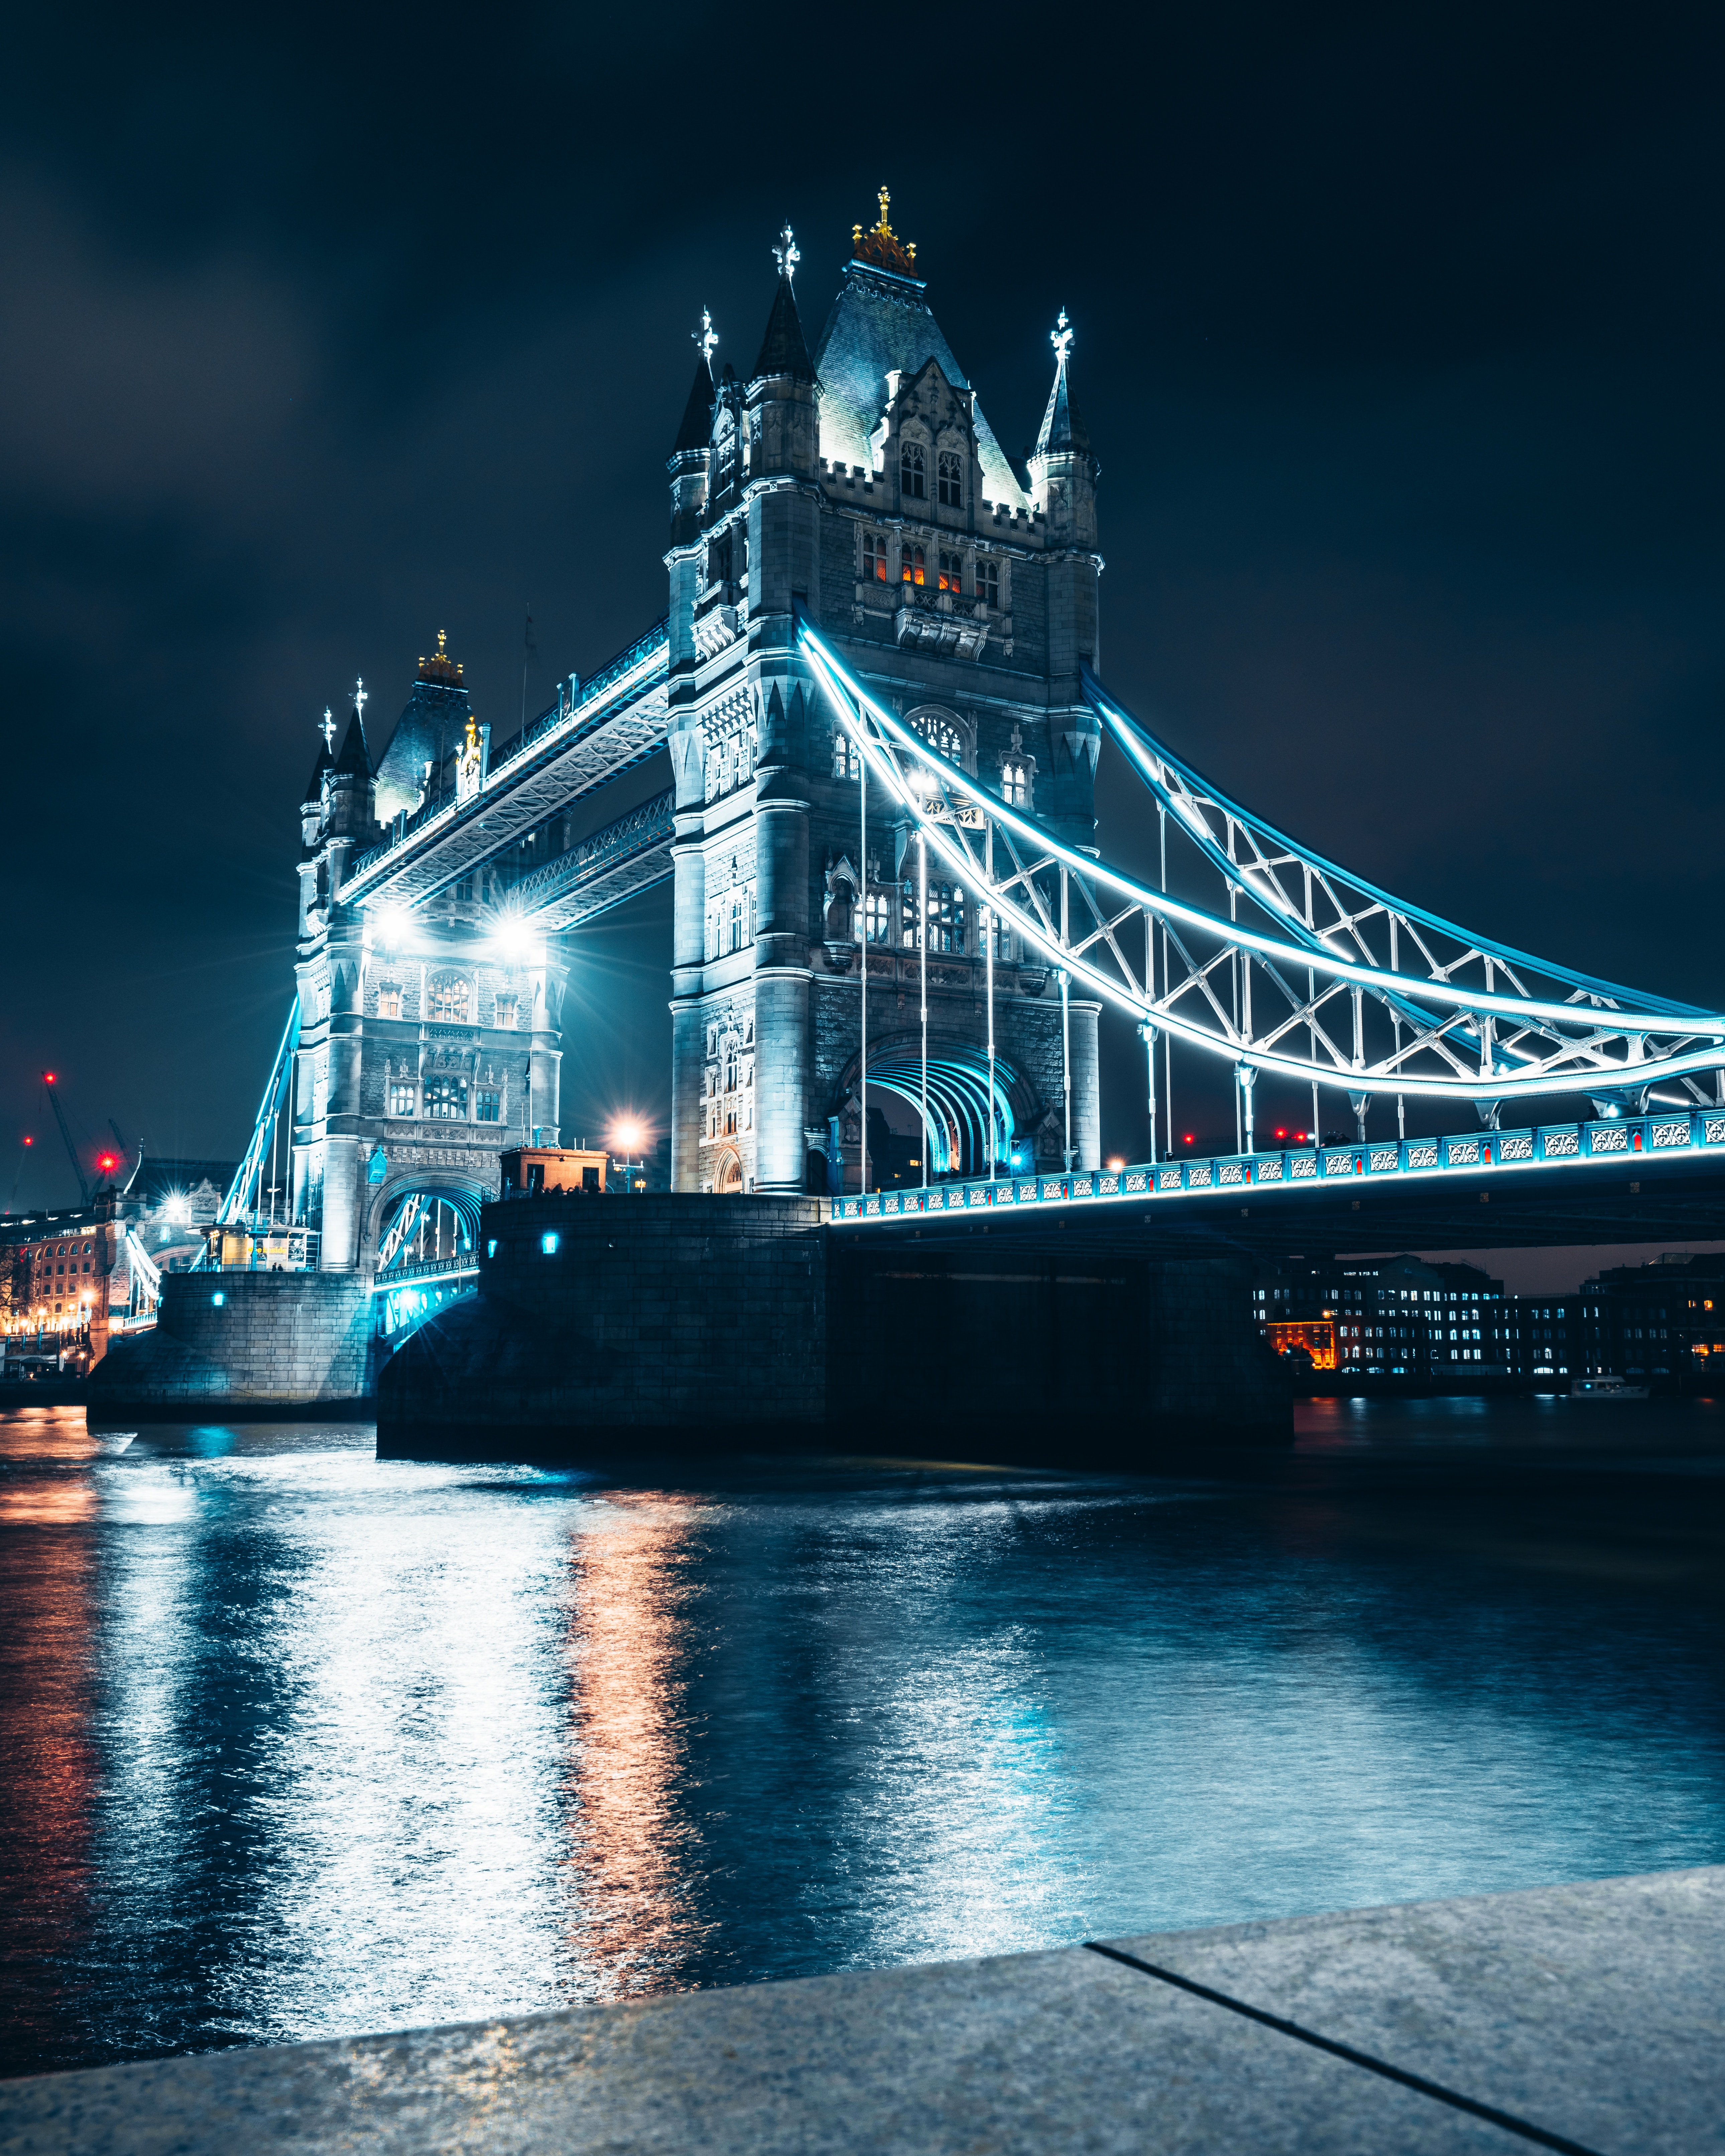 rivers, cities, architecture, night city, bridge, backlight, illumination wallpapers for tablet